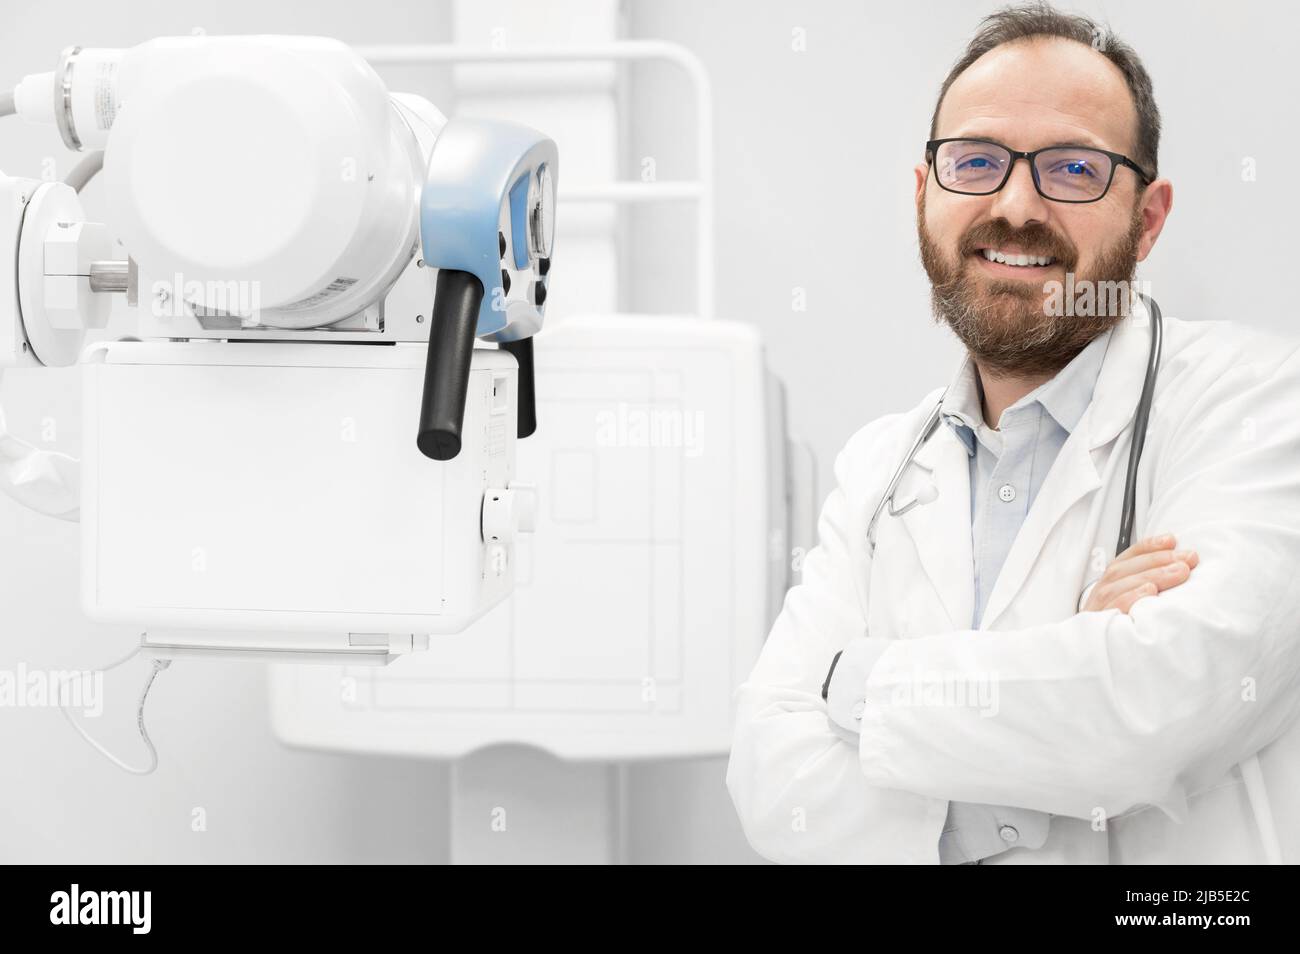 Smiling confident radiologist standing near x-ray equipment. High quality photo. Stock Photo